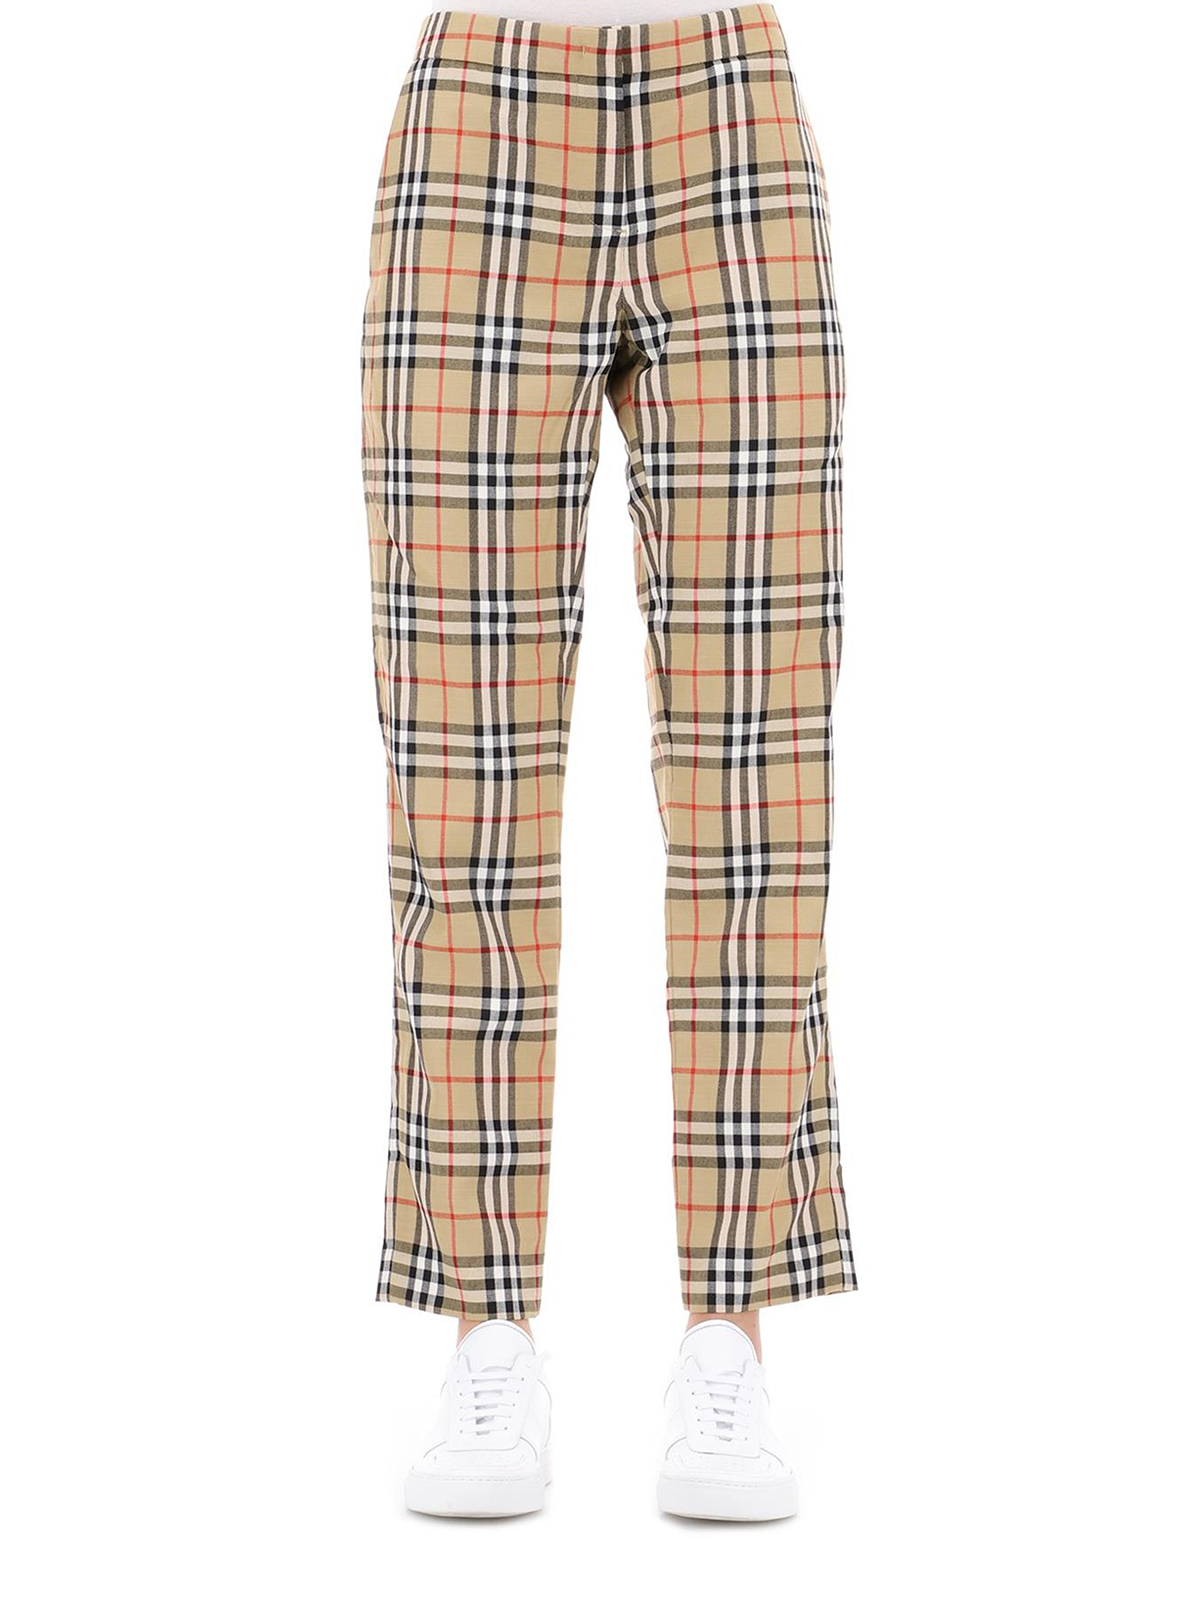 Burberry - Check print trousers - 8004058